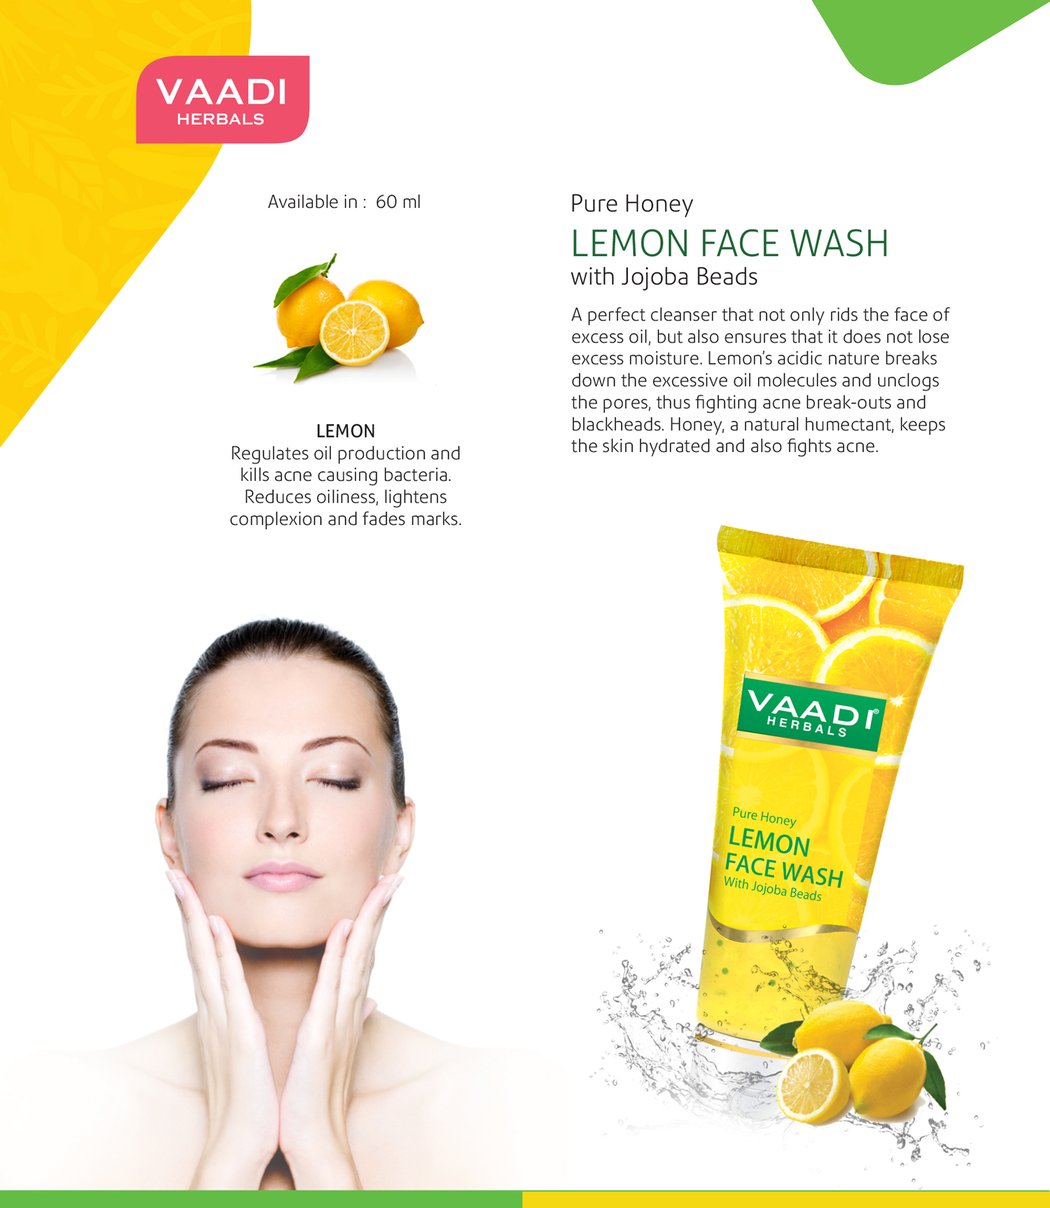 Skin Hydrating Organic Lemon Face Wash with Jojoba Beads - Removes Excess Oil - Prevents Acne (60 ml / 2.1 fl oz)